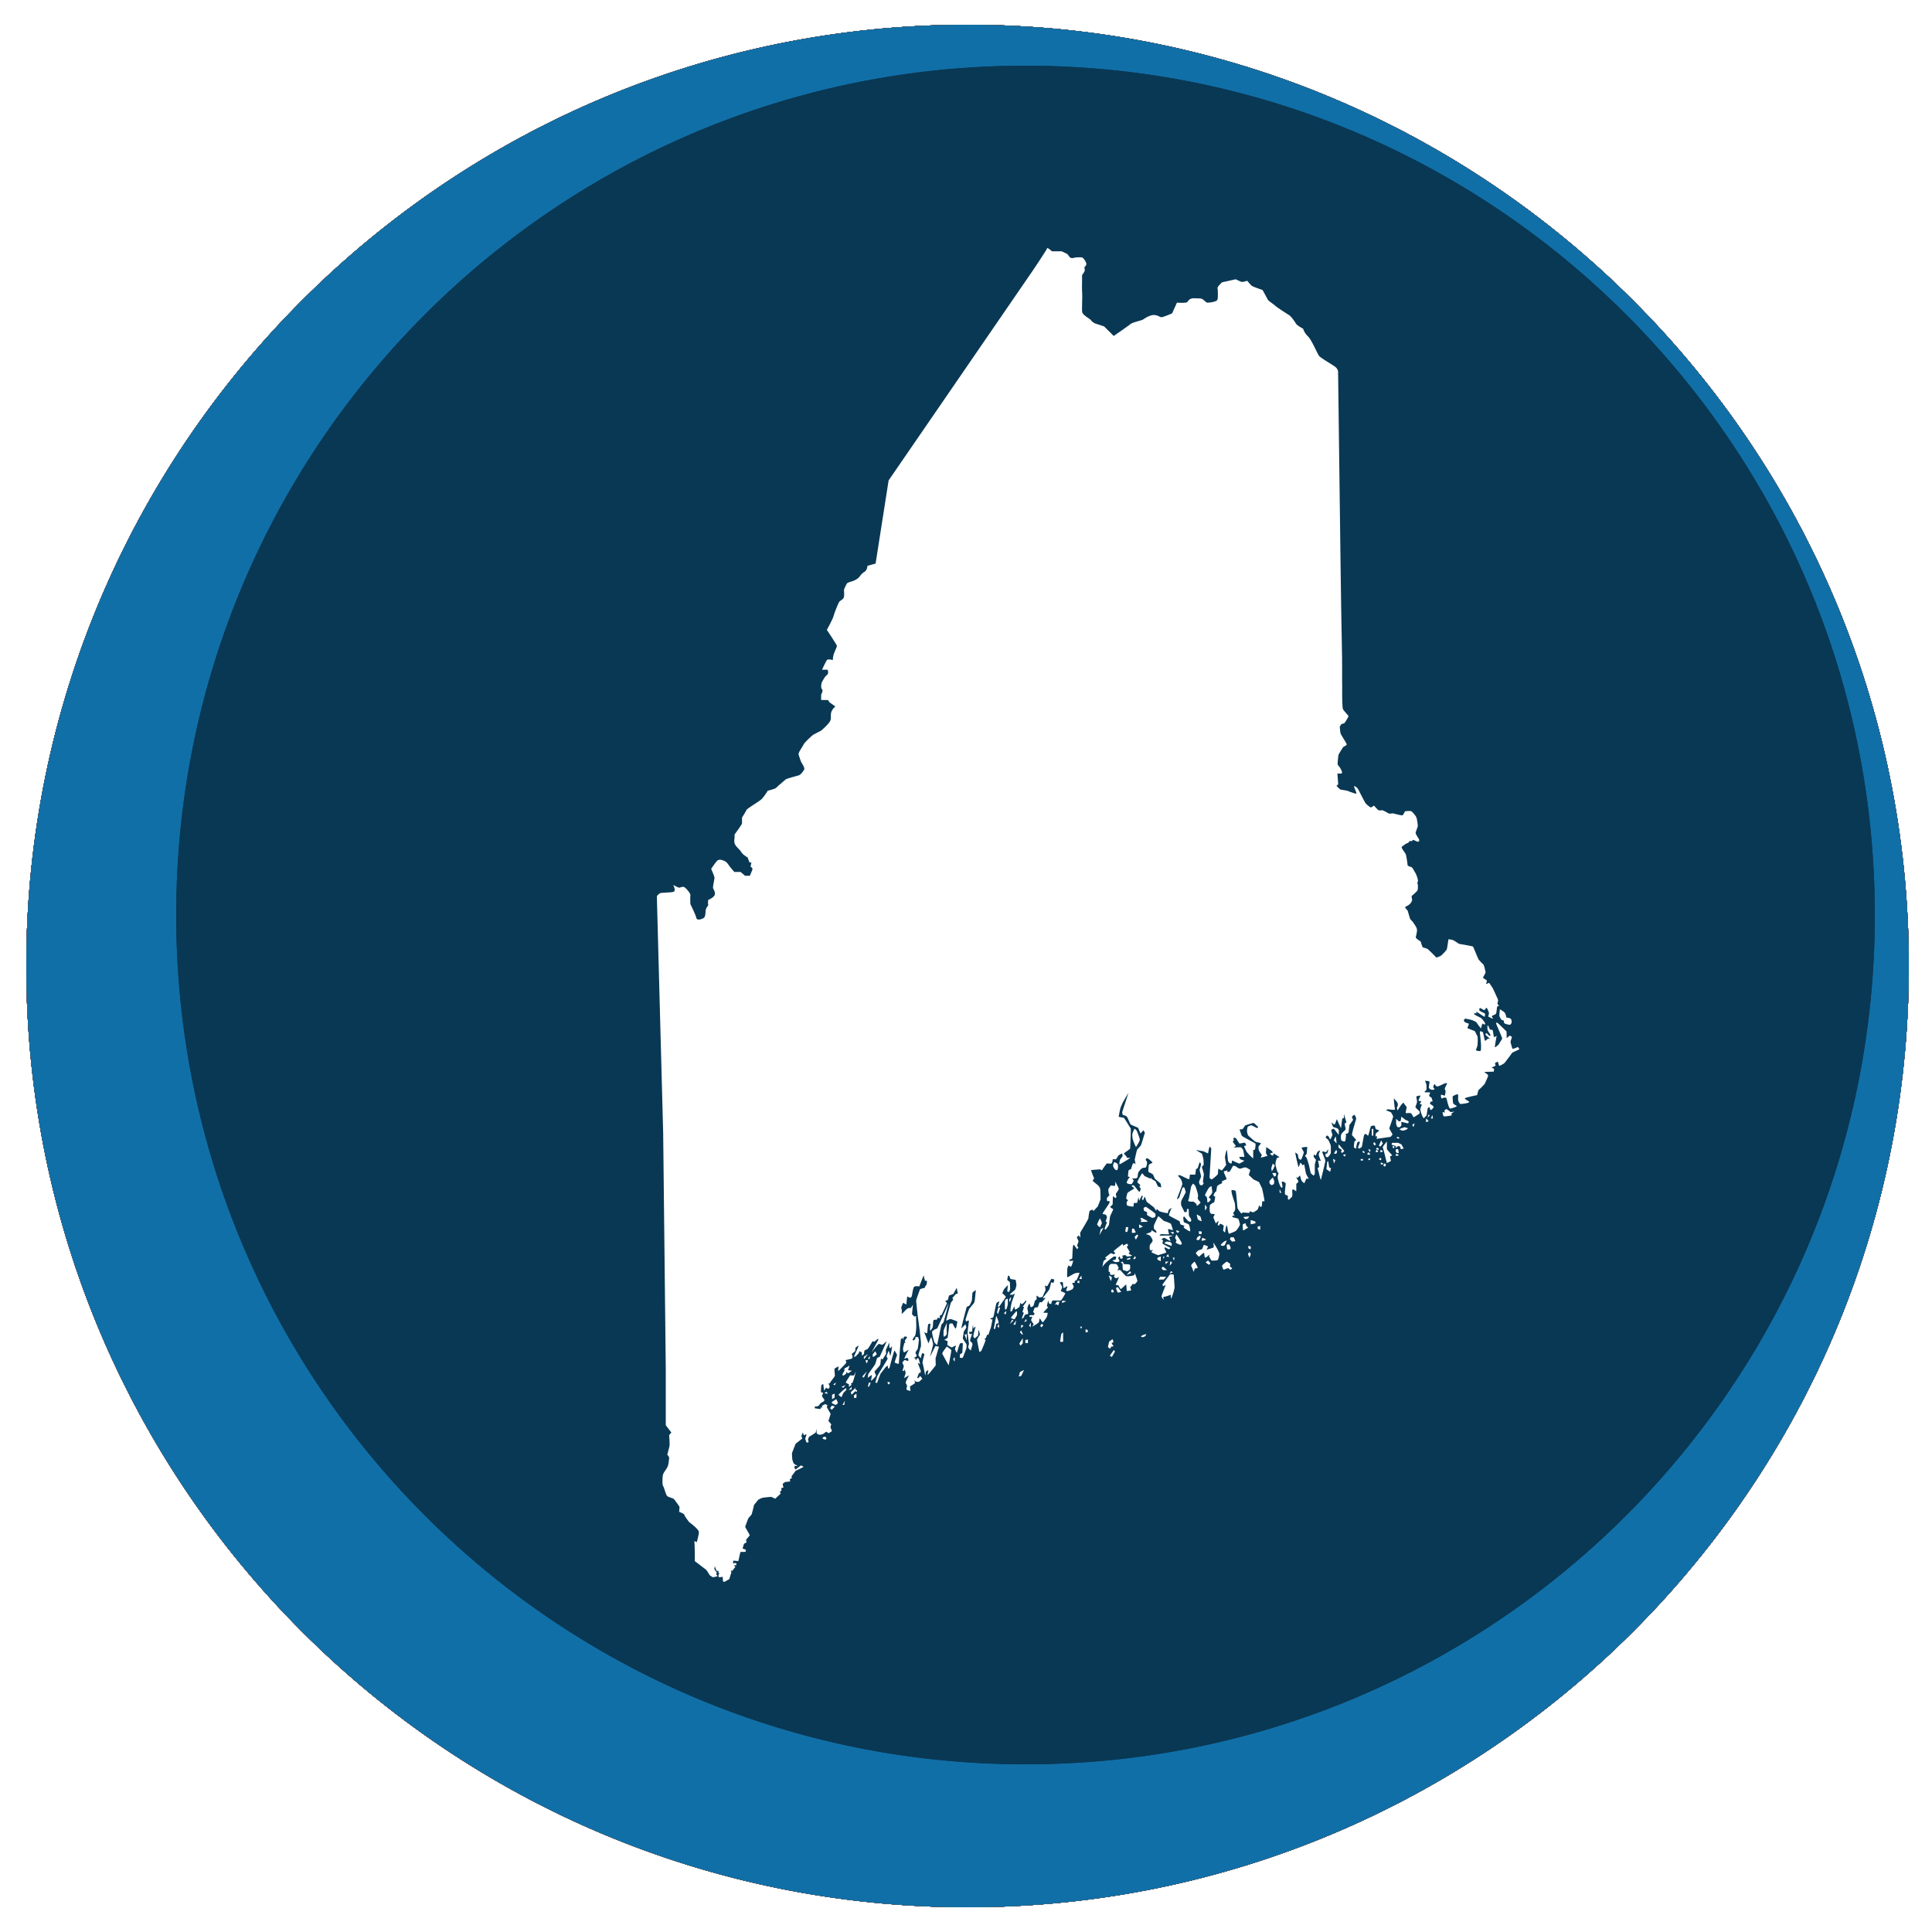 Maine state shape in a circle